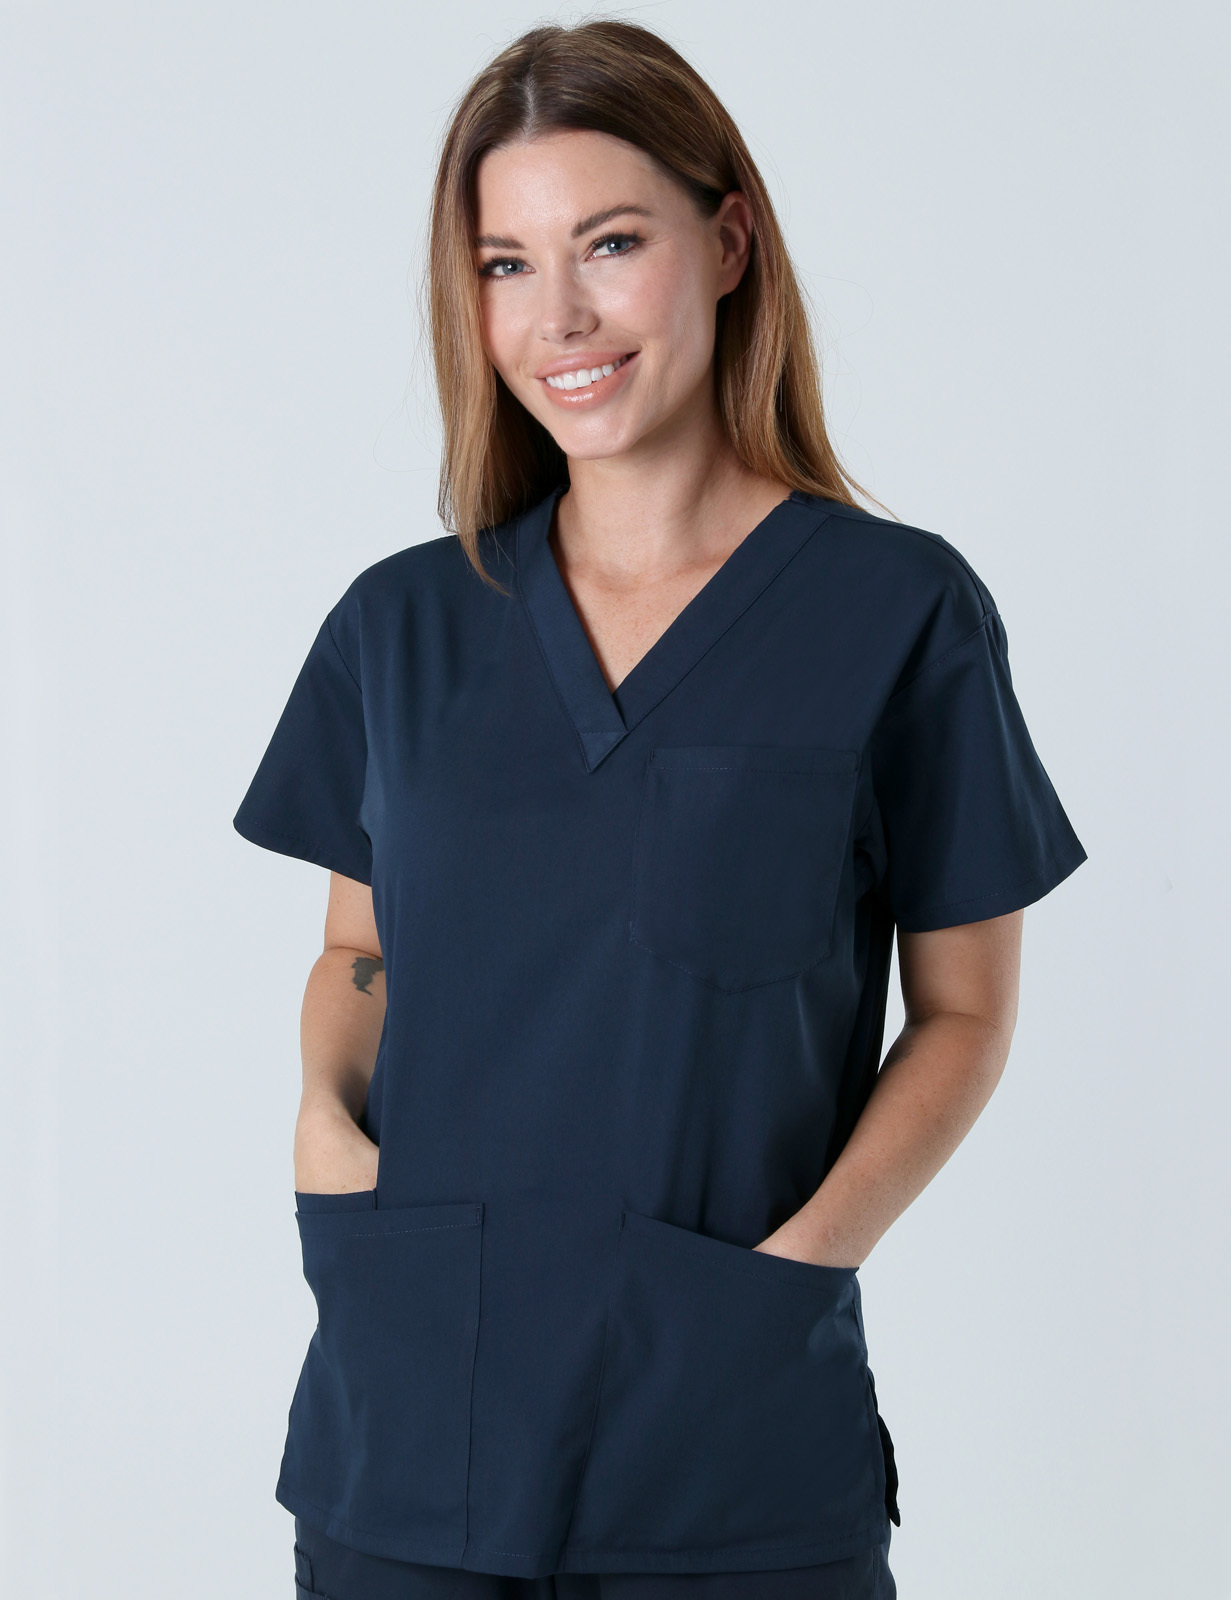 The Alfred Hospital - Emergency Department (4 Pocket Scrub Top and Cargo Pants in Navy incl Logos)